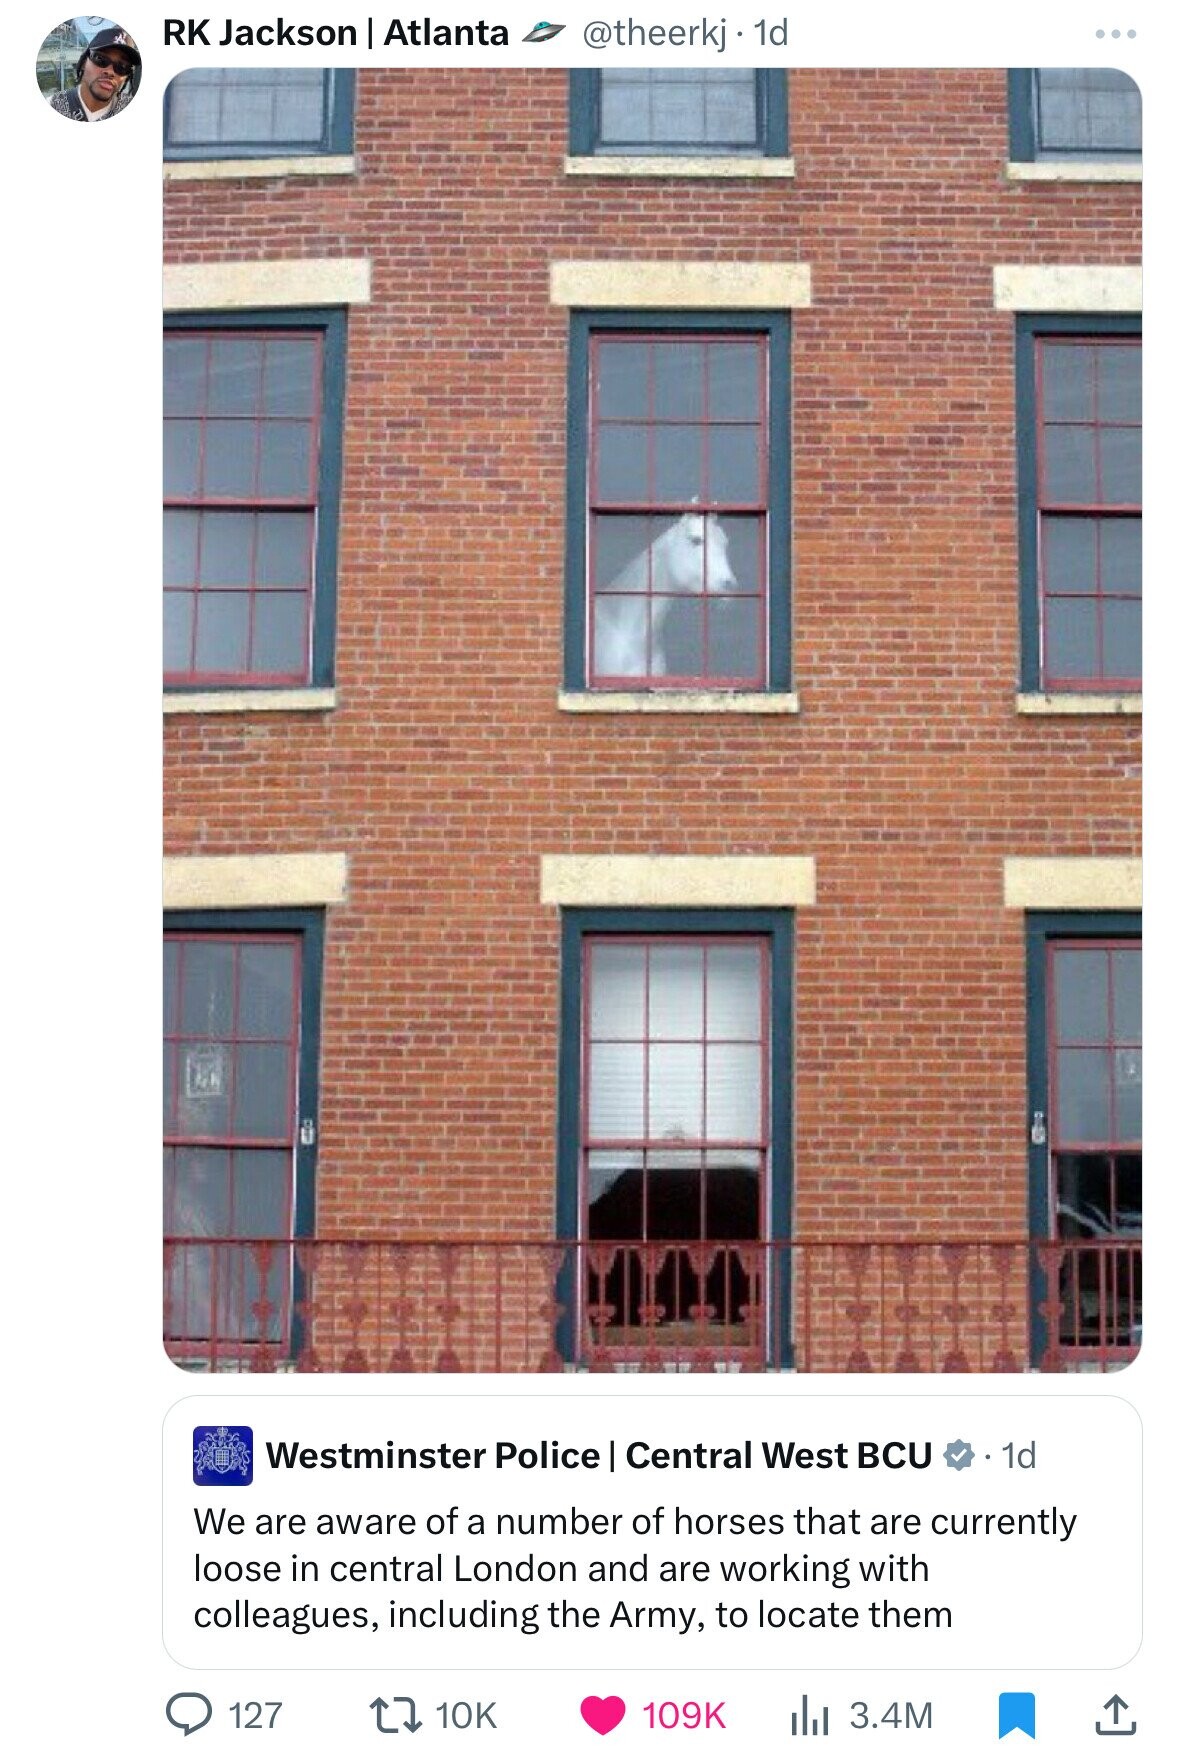 soon horse in window - Rk Jackson | Atlanta 1d Westminster Police | Central West Bcu . 1d We are aware of a number of horses that are currently loose in central London and are working with colleagues, including the Army, to locate them 127 l 3.4M